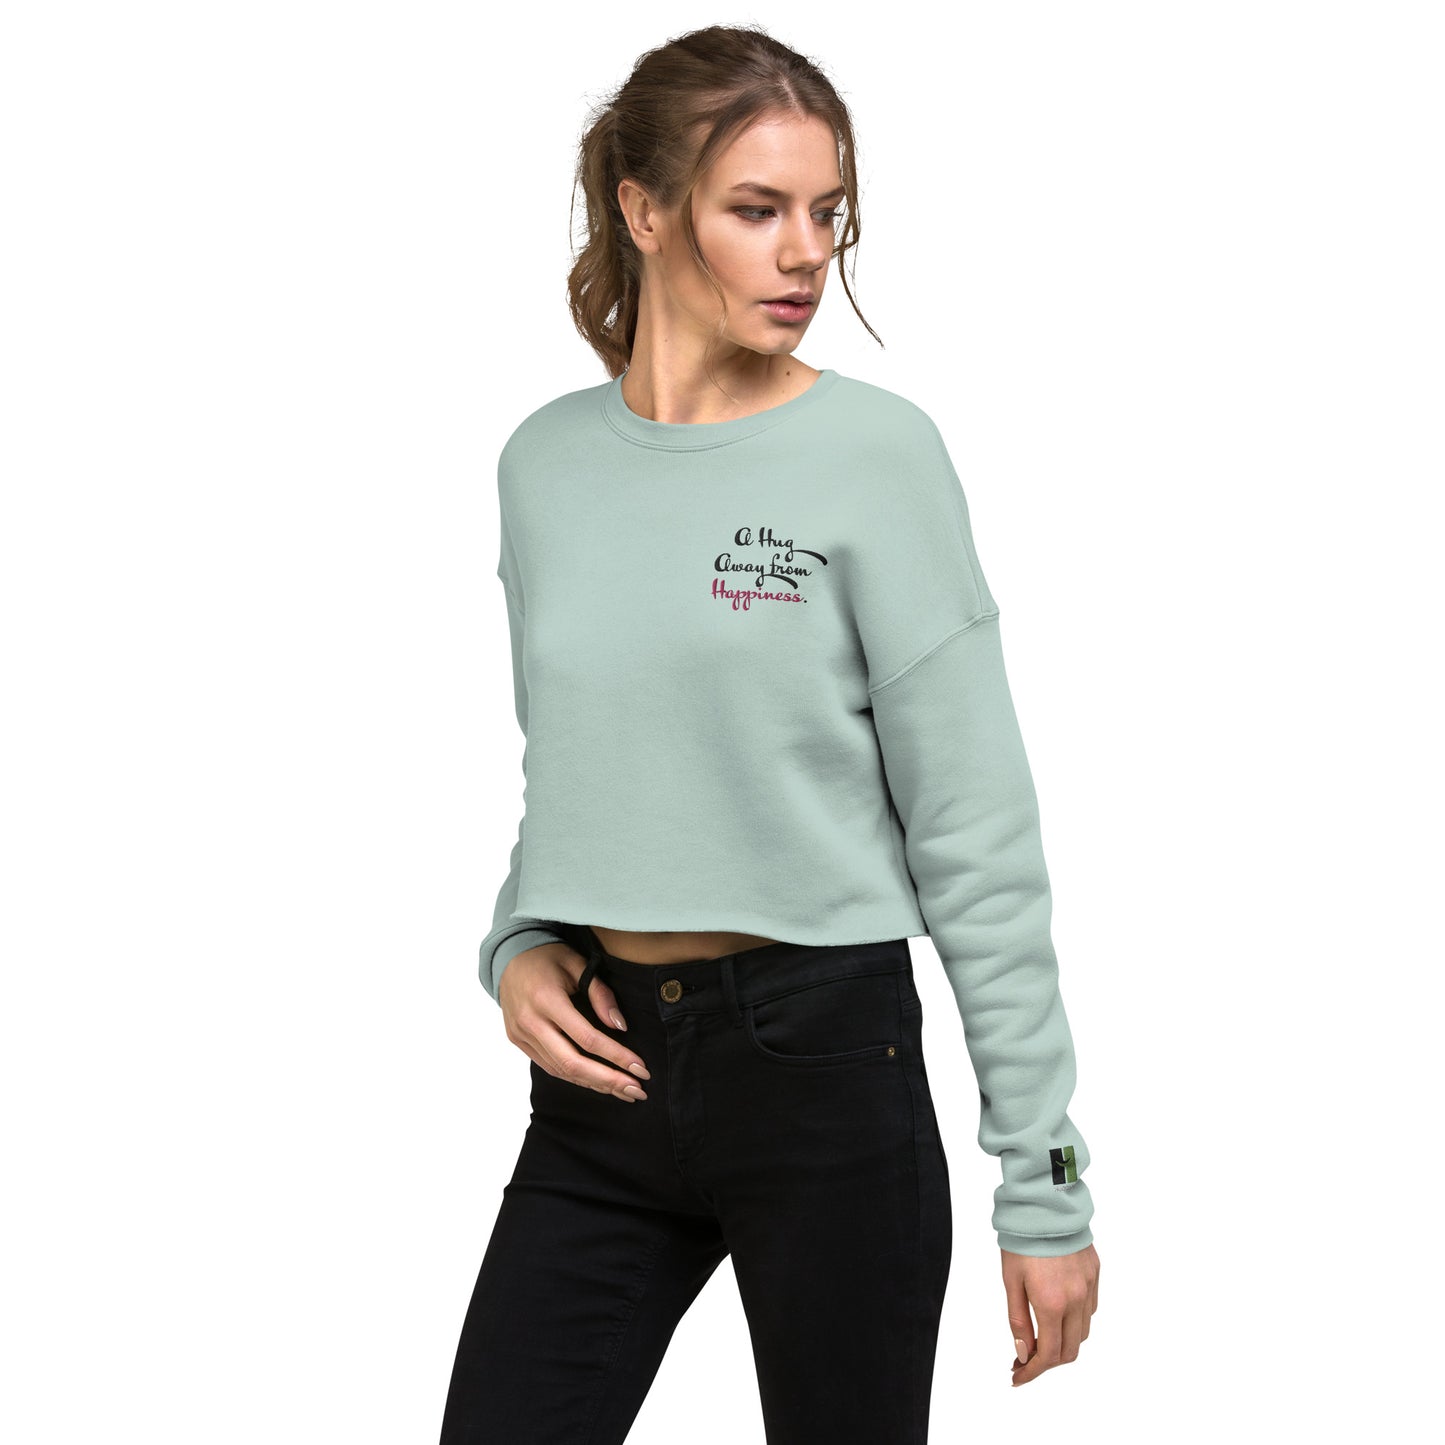 Crop-Pullover "A Hug Away from Happiness"